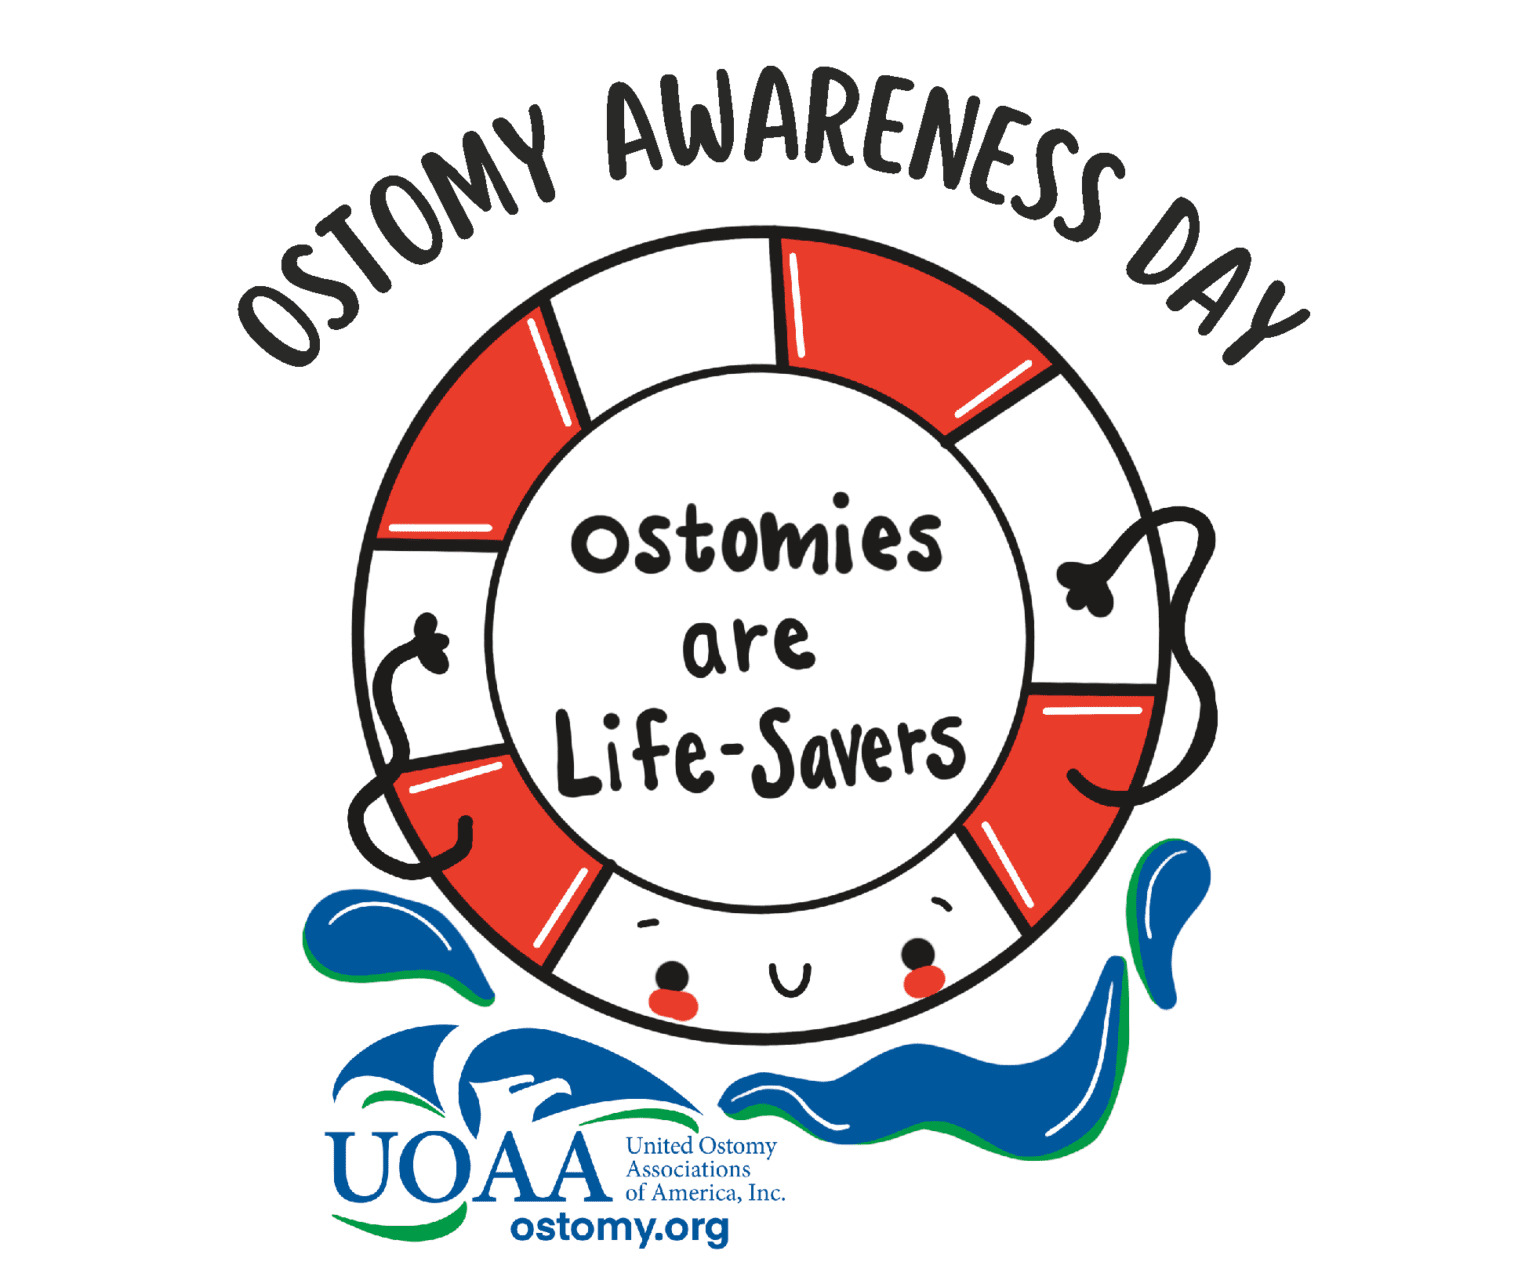 6 Ways You (Yes, You) Can Make a Difference on Ostomy Awareness Day